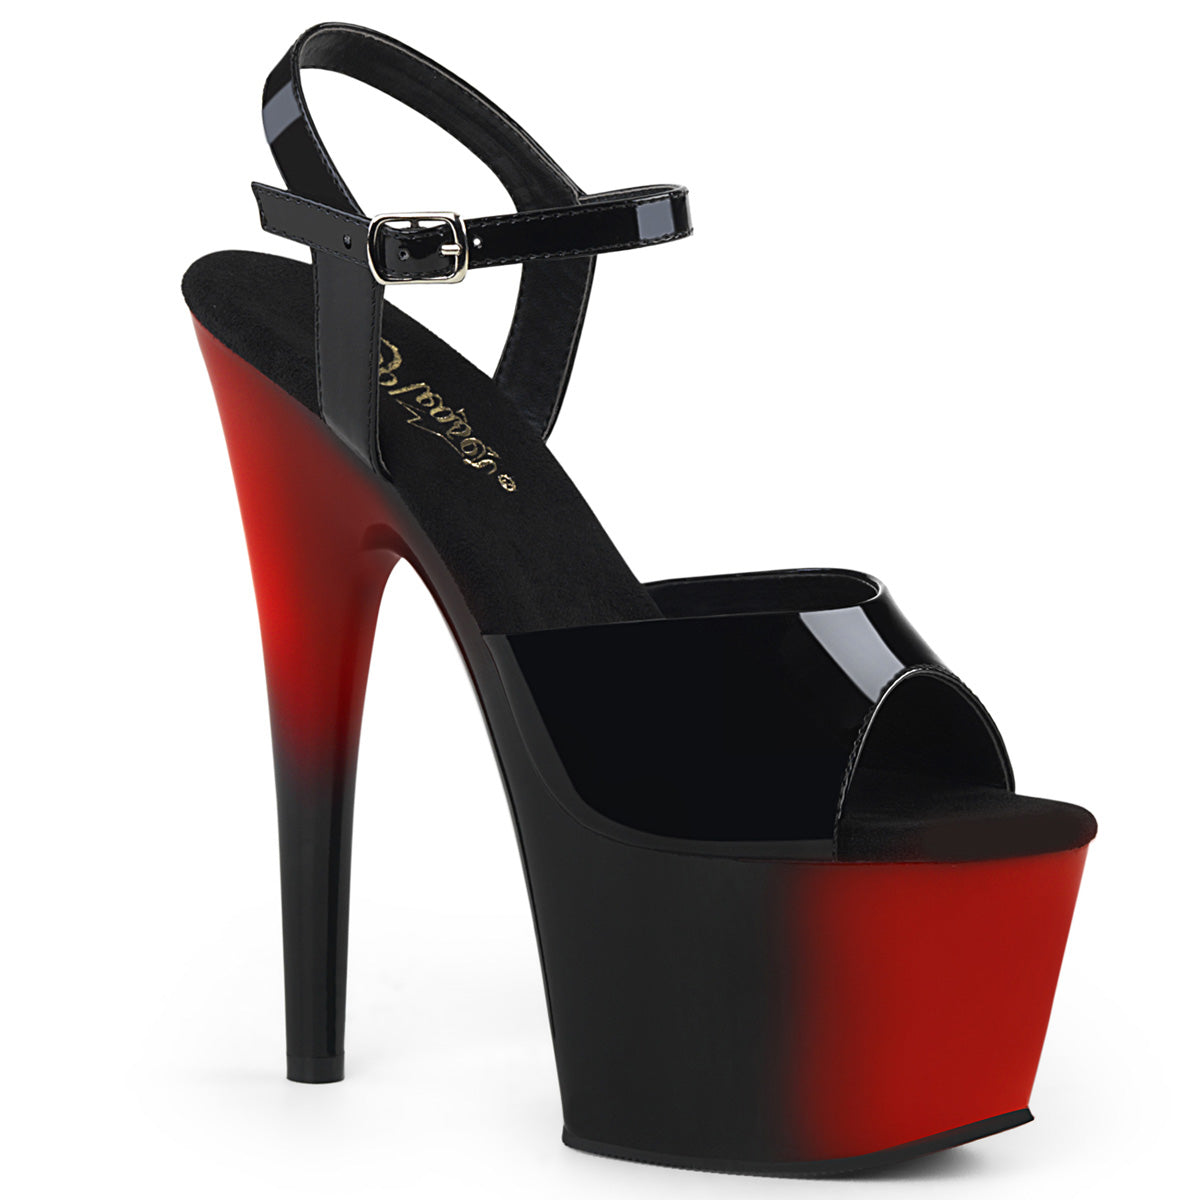 ADORE-709BR Pleaser Fetish 7" Heel Black and Red Stripper High Heel Shoes